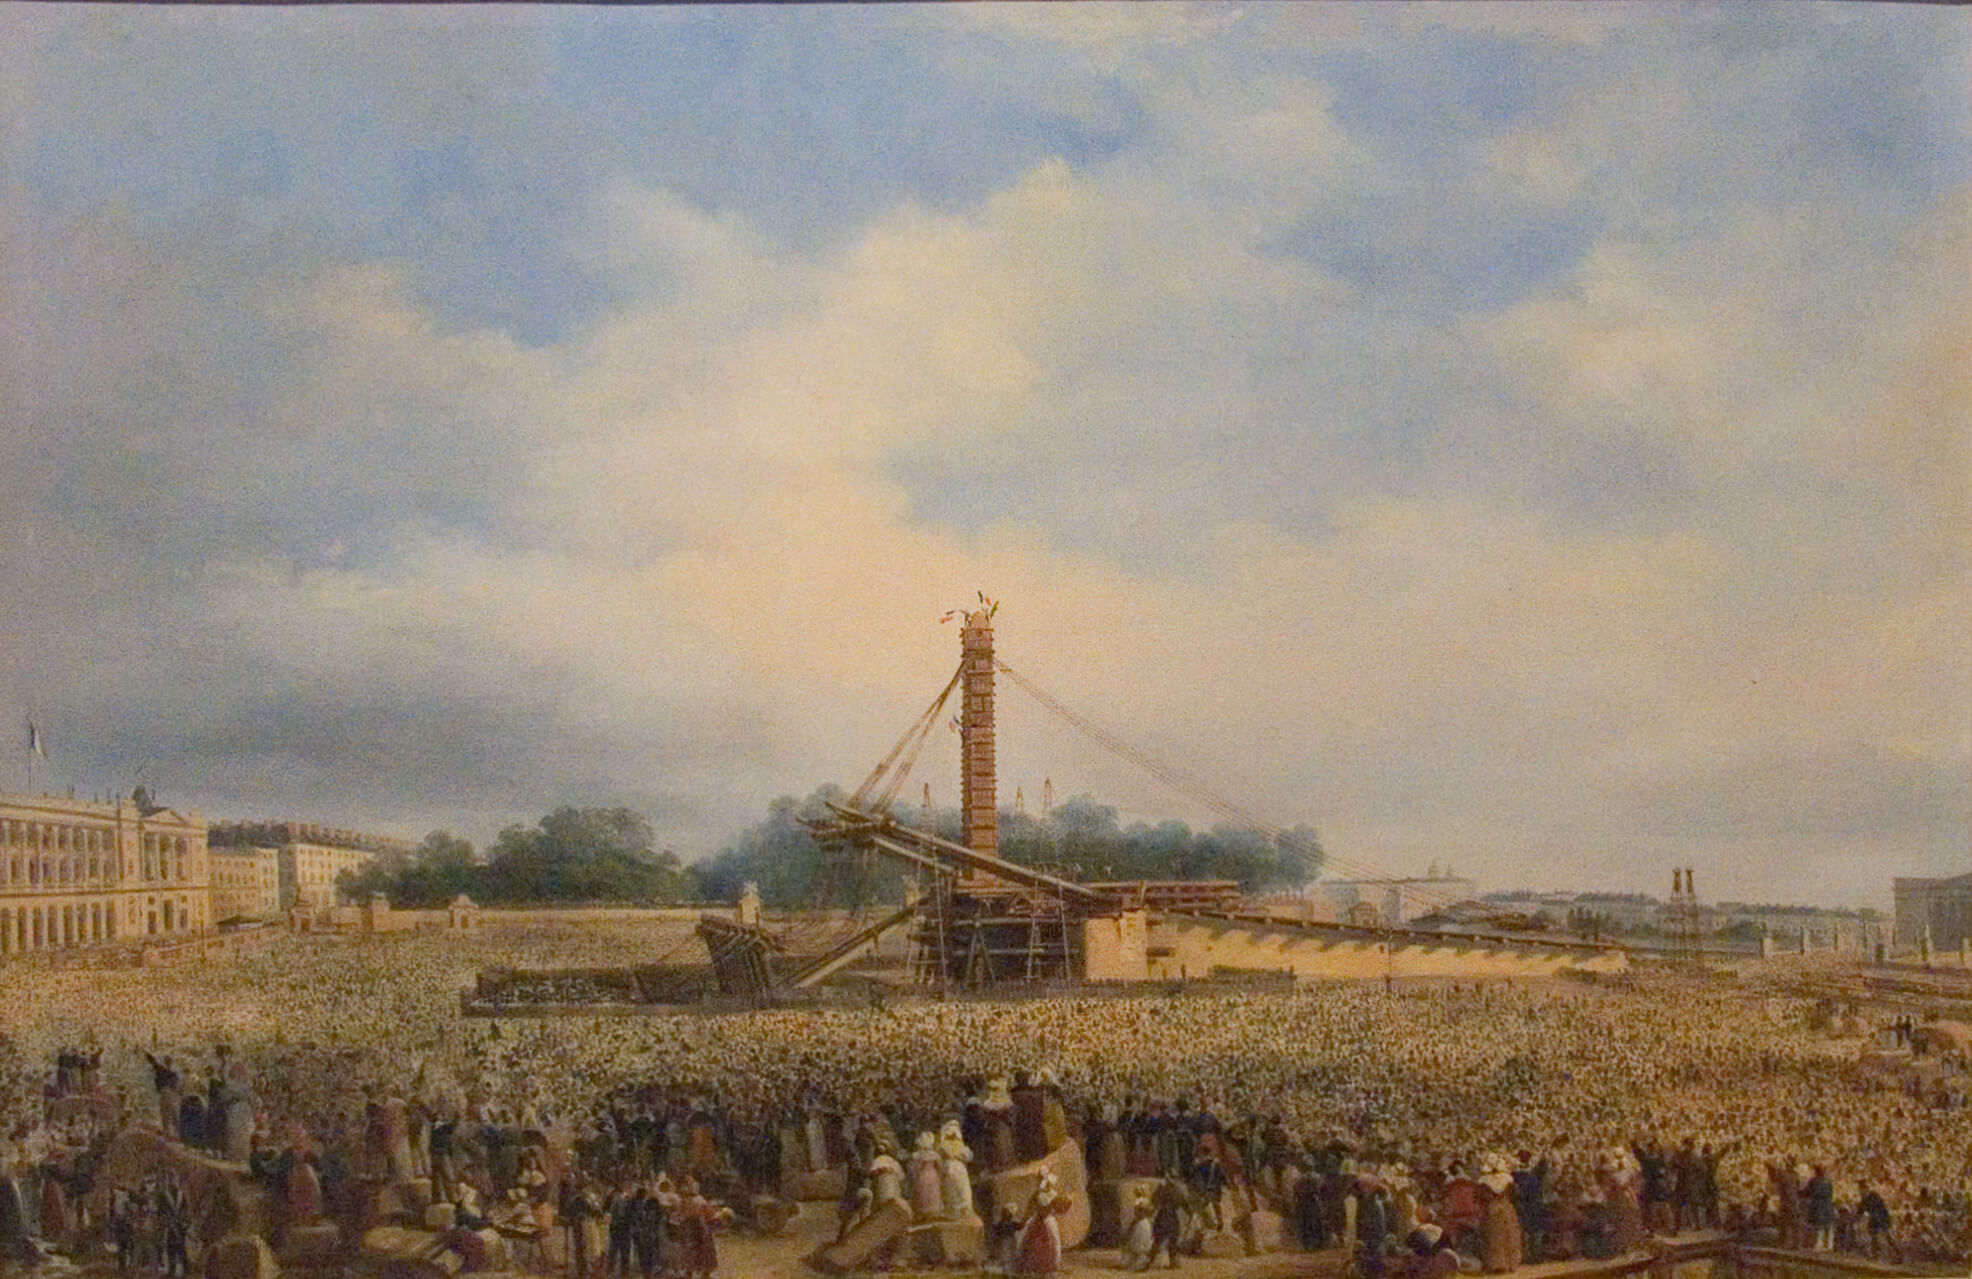 Painting showing the raising of the Luxor Obelisk on the place de la Concorde